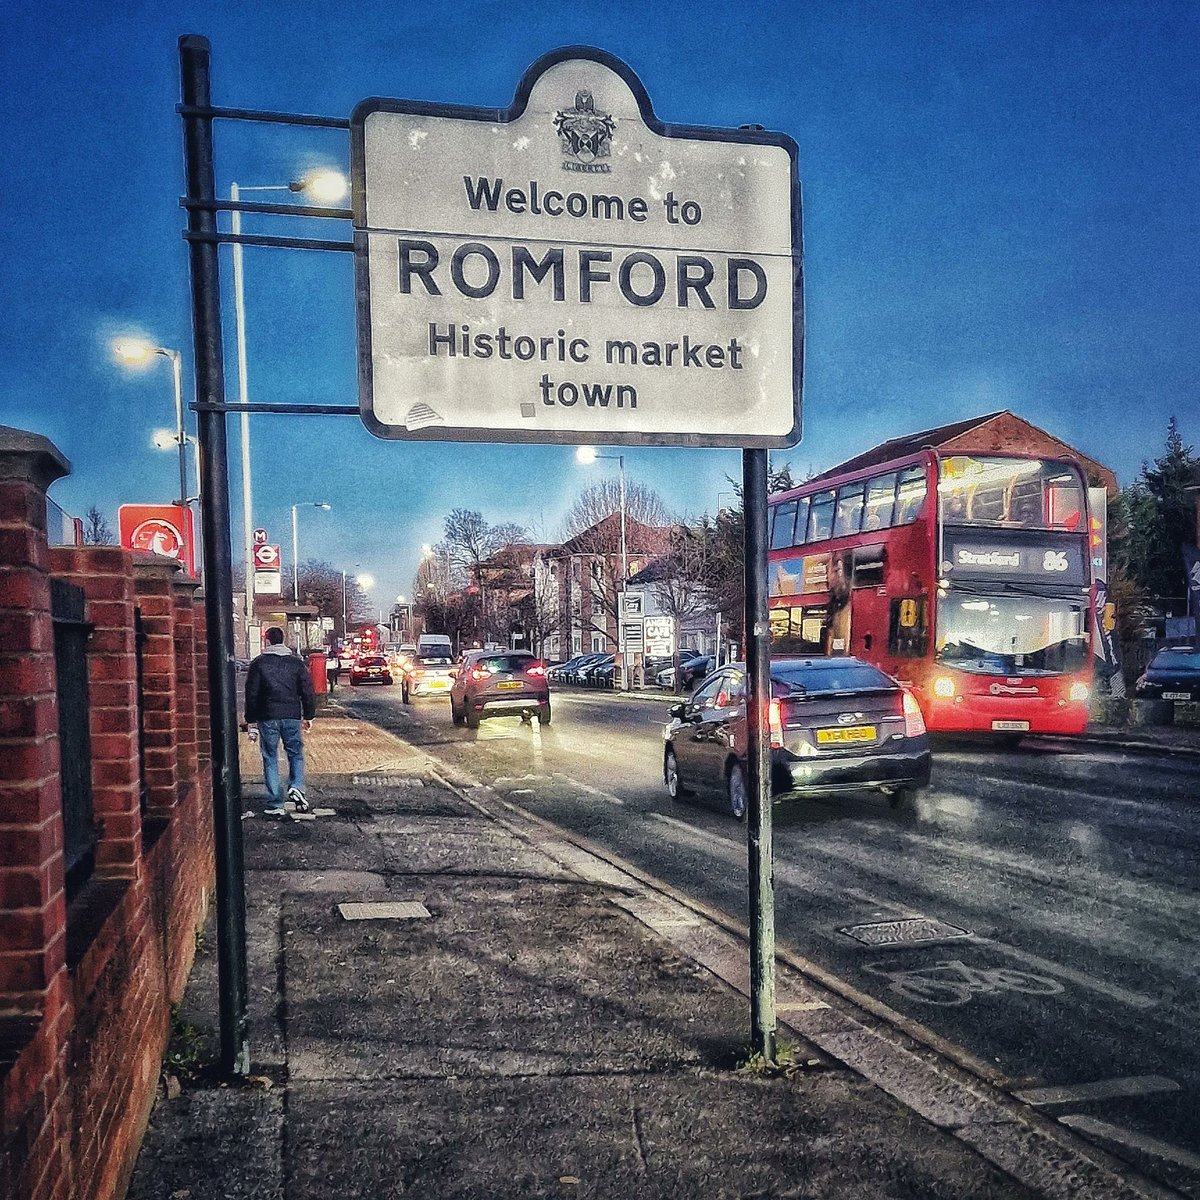 Out and about in my home town of Romford